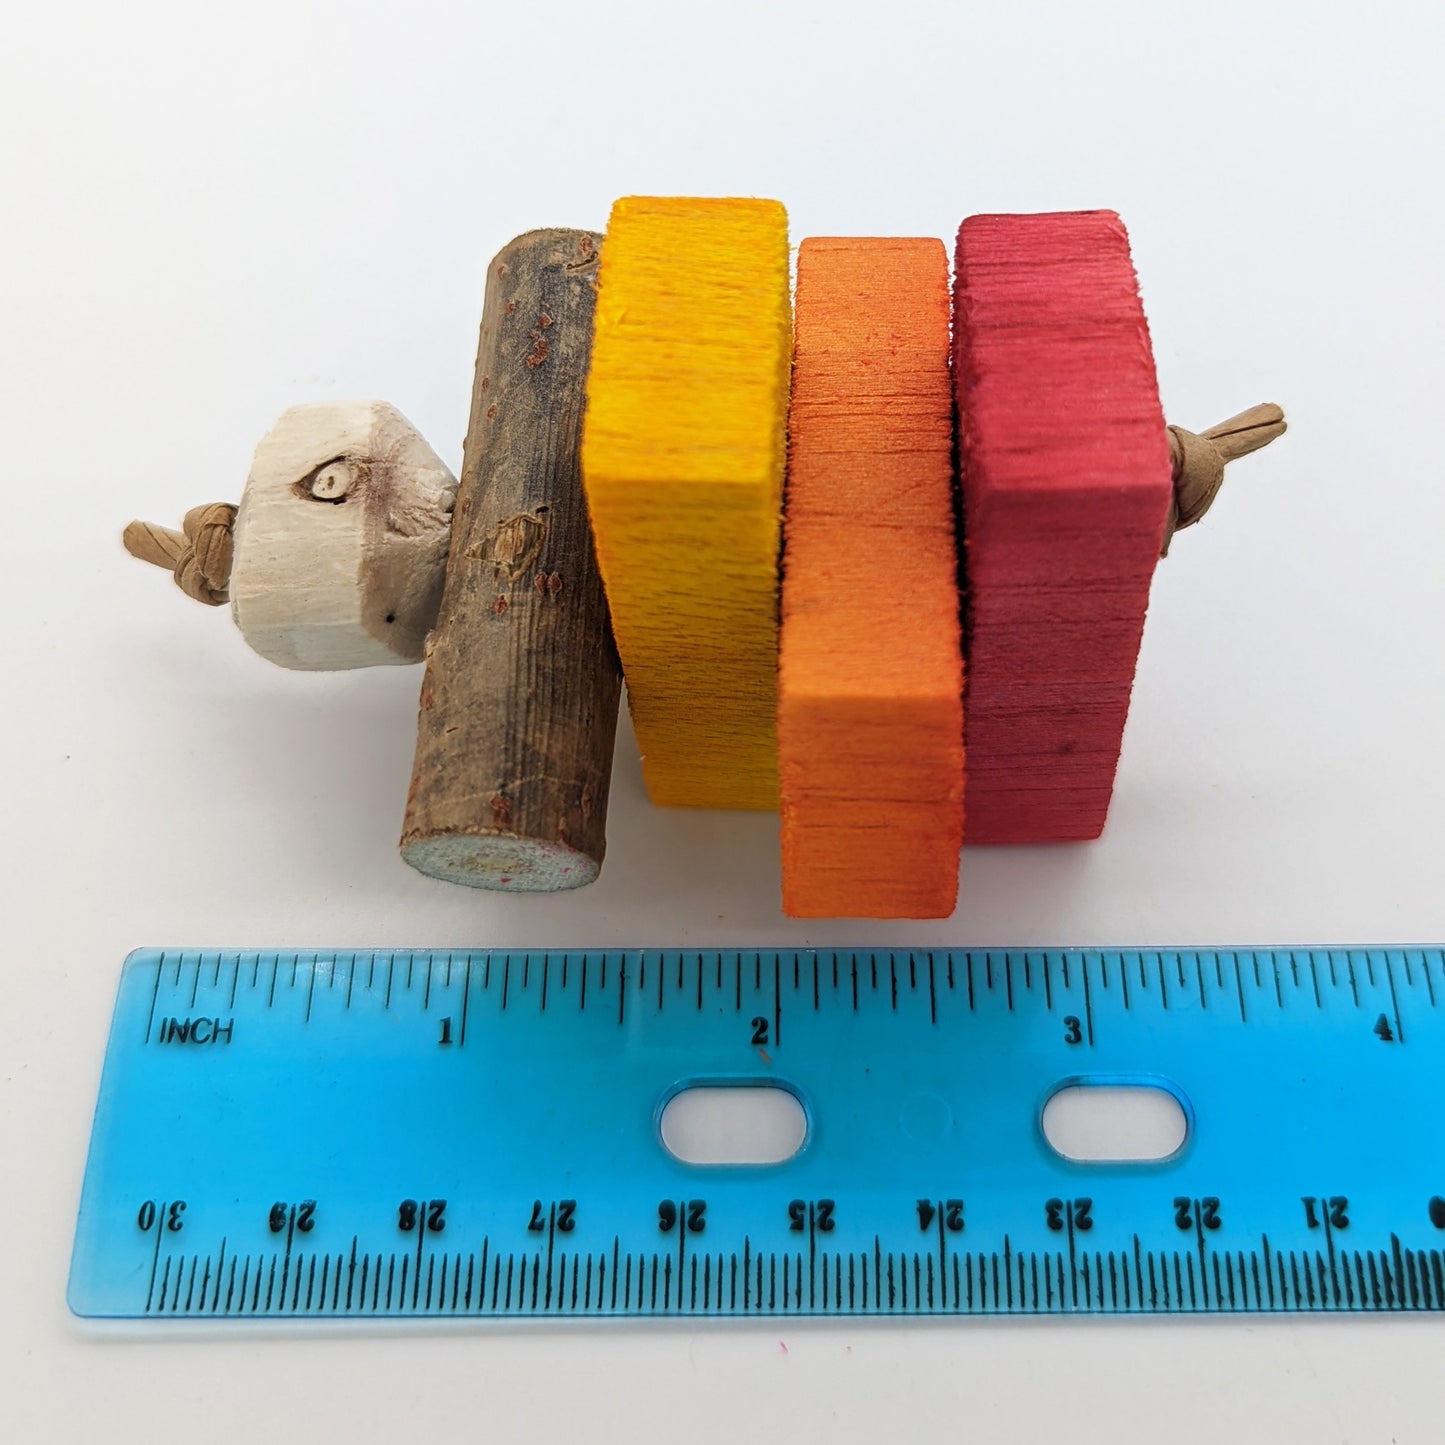 A summer foot toy with yellow, orange, and red balsa, and cottonwood stick, and sola bead. For small to medium birds as either a foot toy, small hanging toy, disabled birds, baby birds, or in a parrot carrier. Shown with a ruler, measures about 3 inches long. 